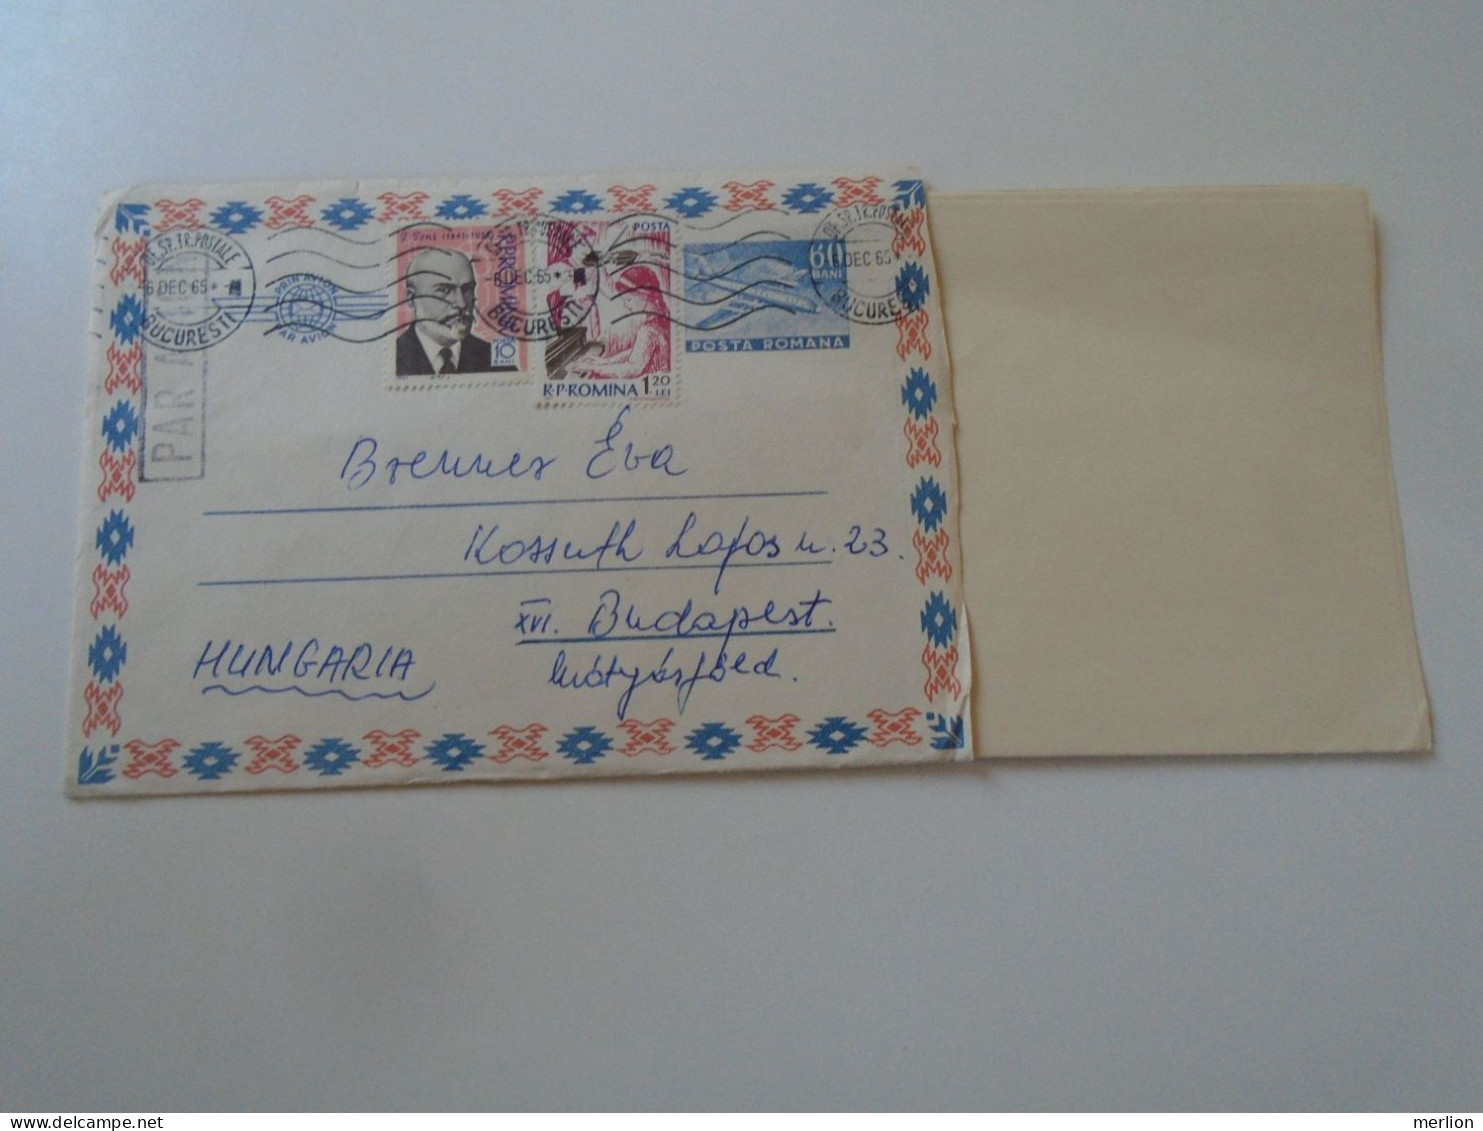 D197934 Romania   Stationery Airmail  Cover   Tarom Bucuresti  1965   Sent To Hungary  Brenner Éva Stamp  Piano Violin - Covers & Documents